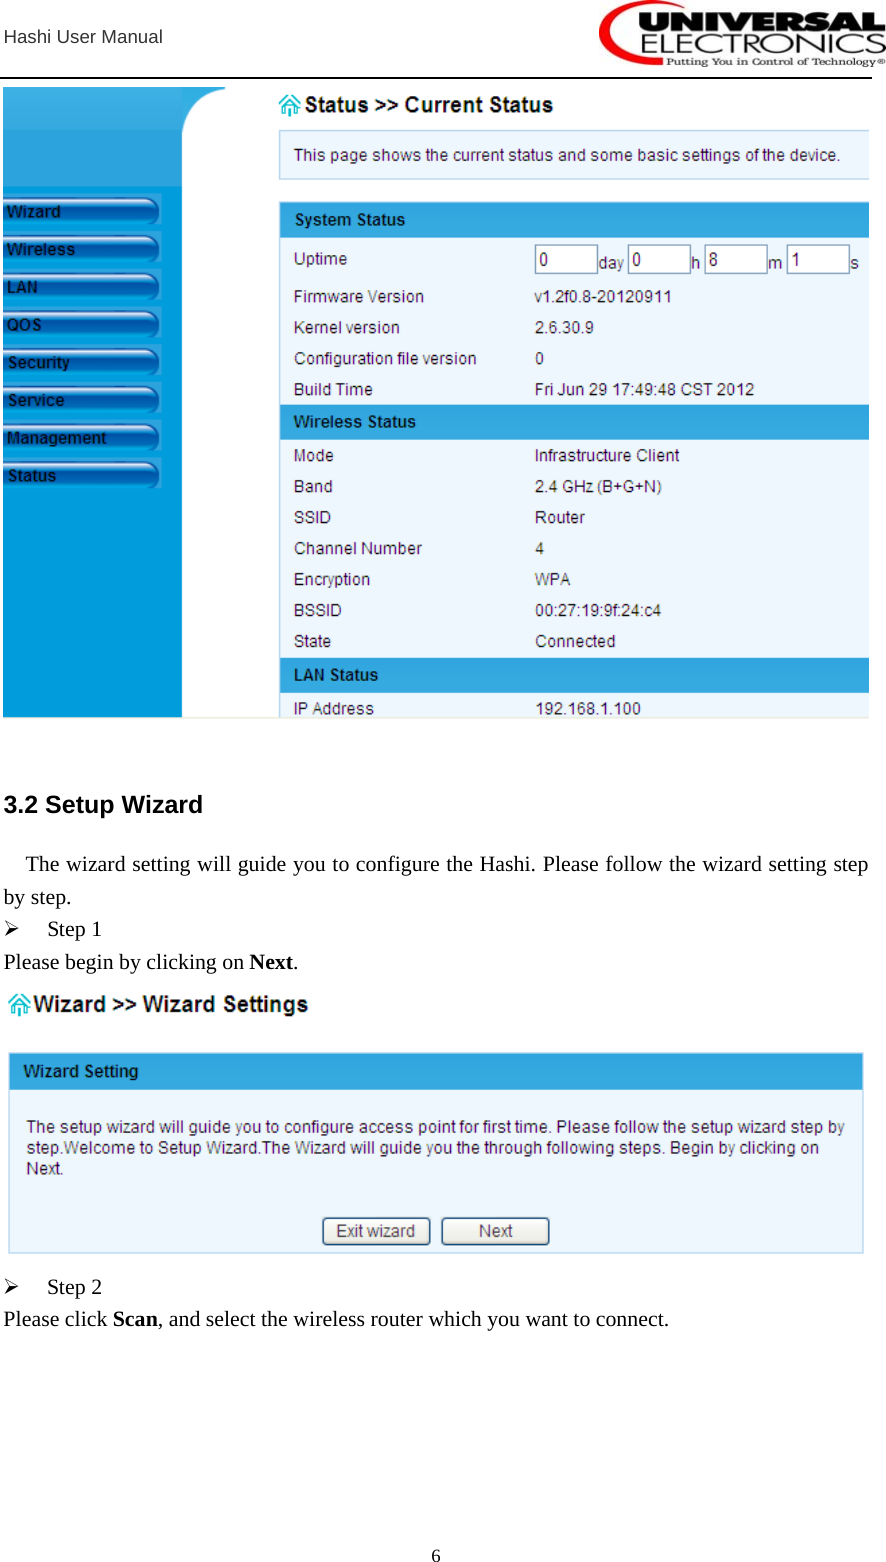  Hashi User Manual  6  3.2 Setup Wizard     The wizard setting will guide you to configure the Hashi. Please follow the wizard setting step by step. ¾ Step 1 Please begin by clicking on Next.  ¾ Step 2 Please click Scan, and select the wireless router which you want to connect. 